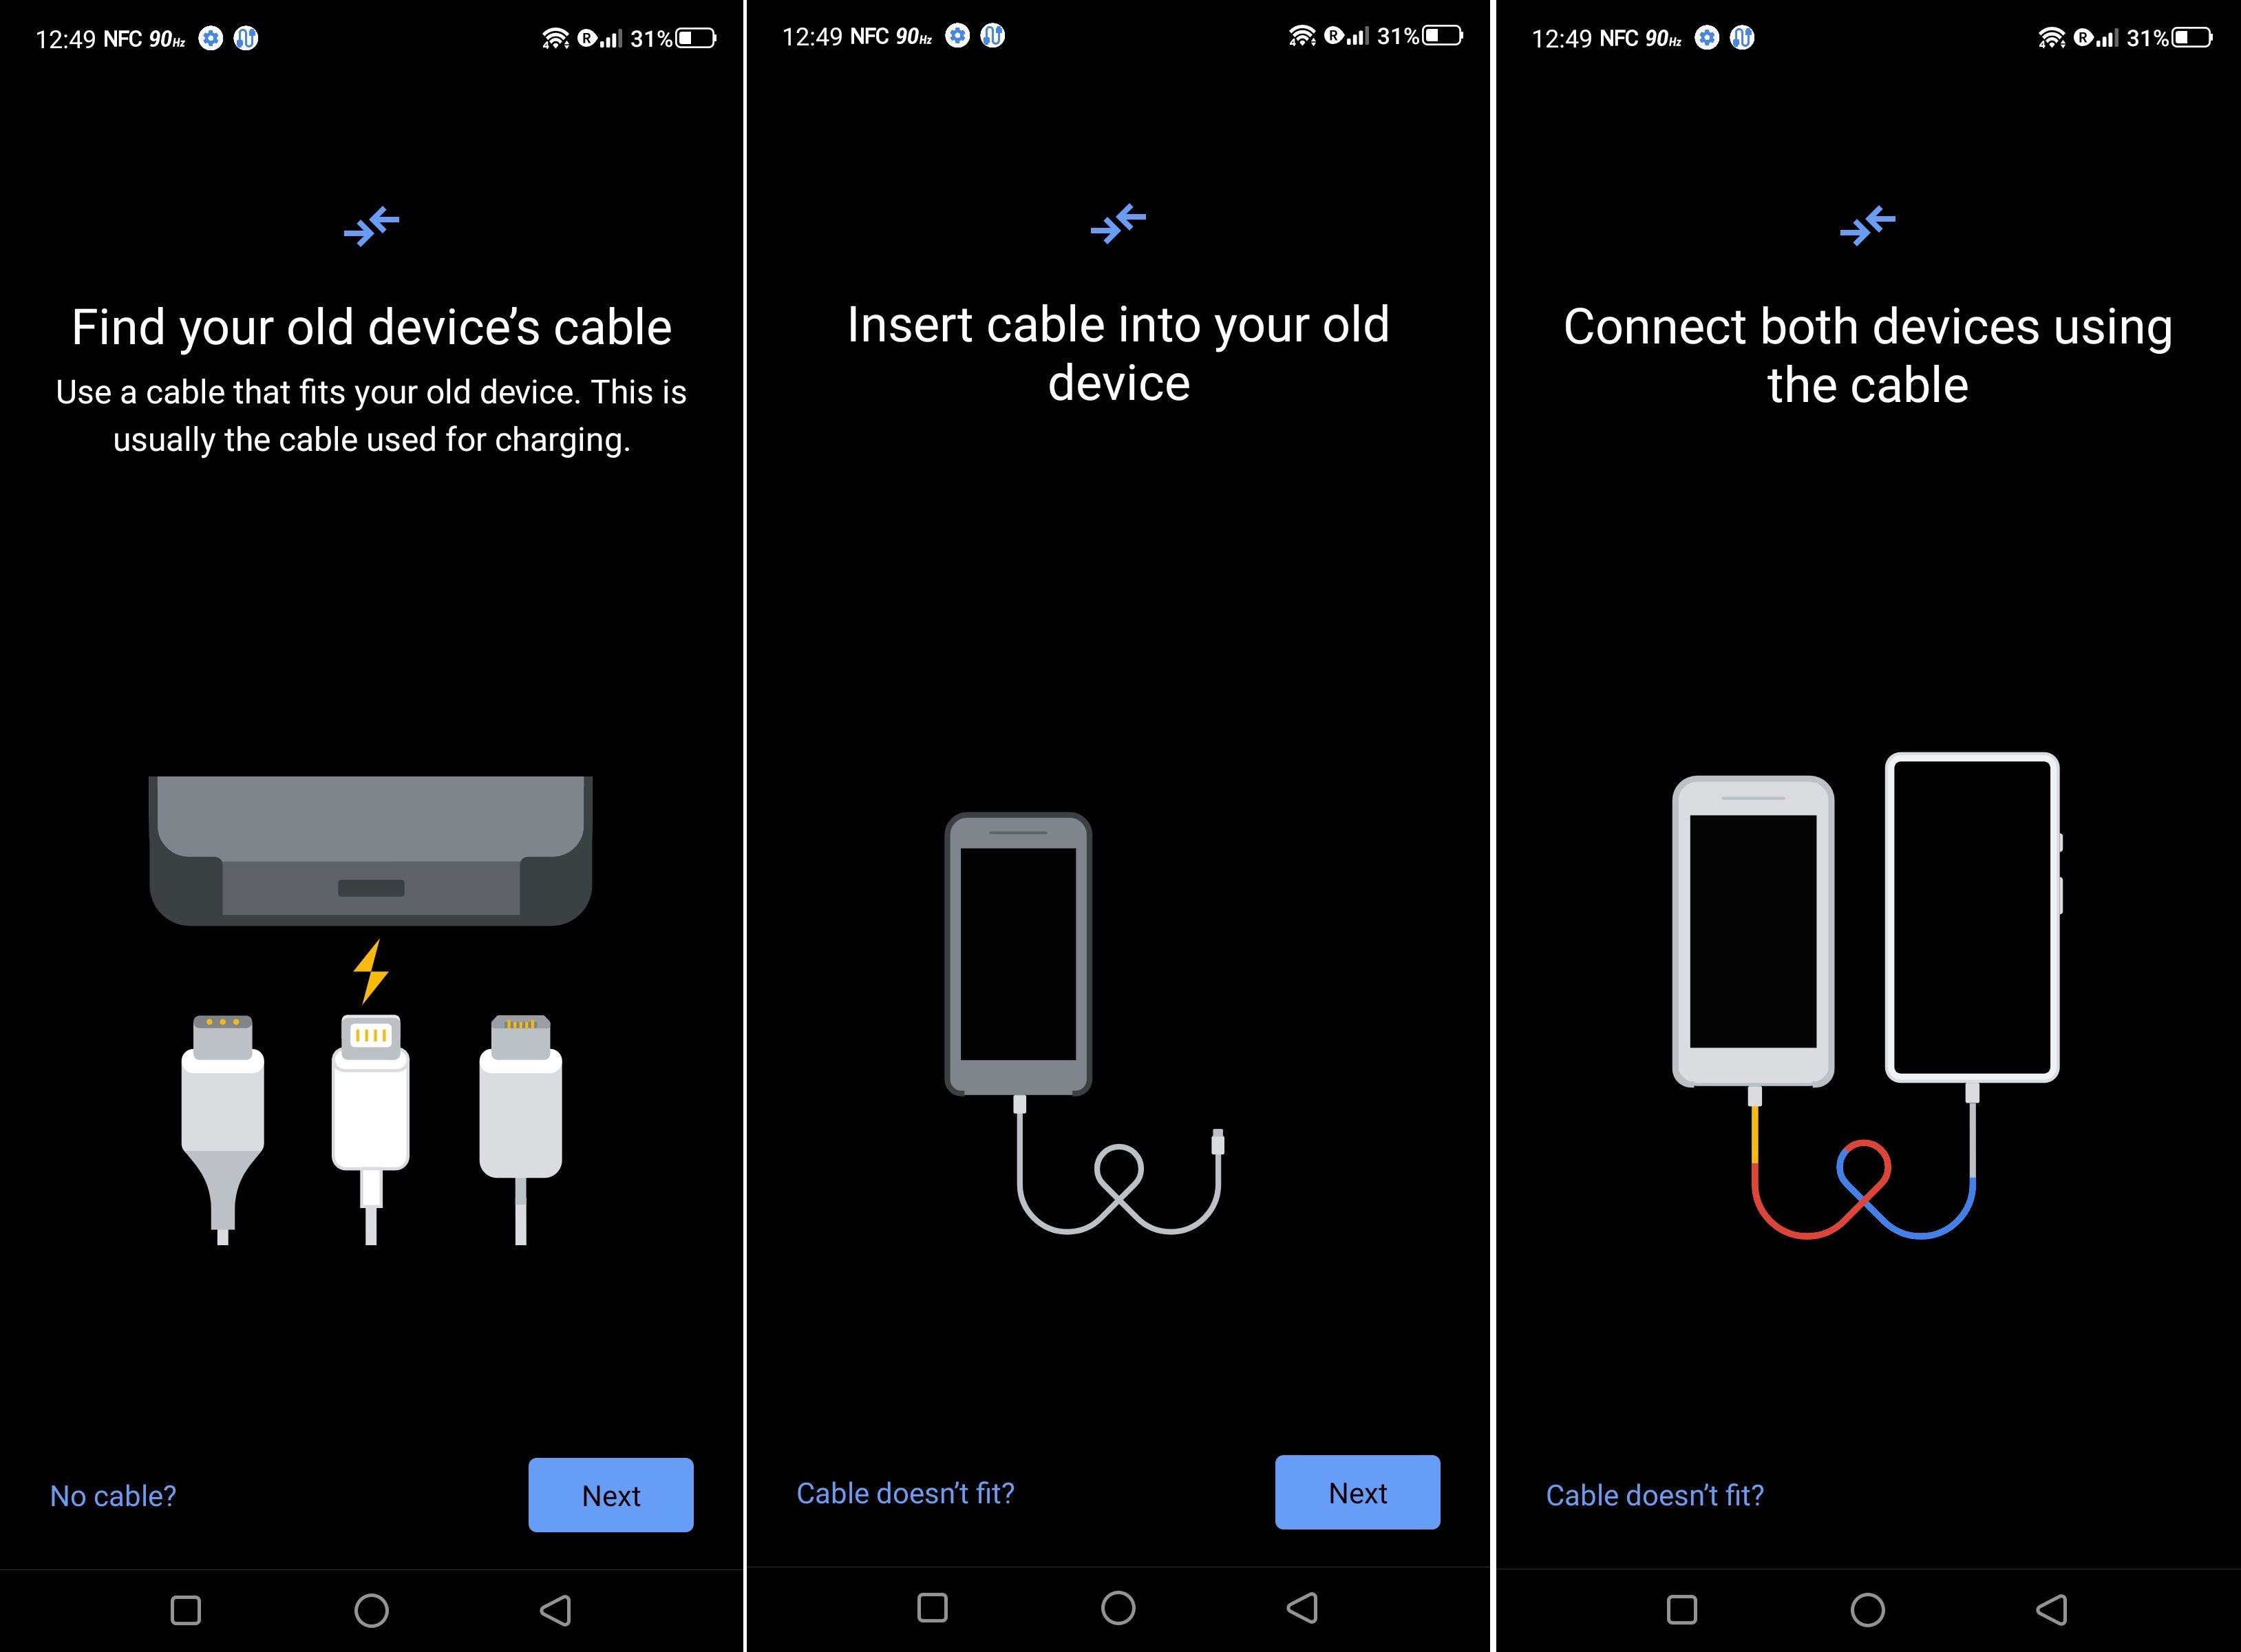 How to restore data and settings to your new Android phone